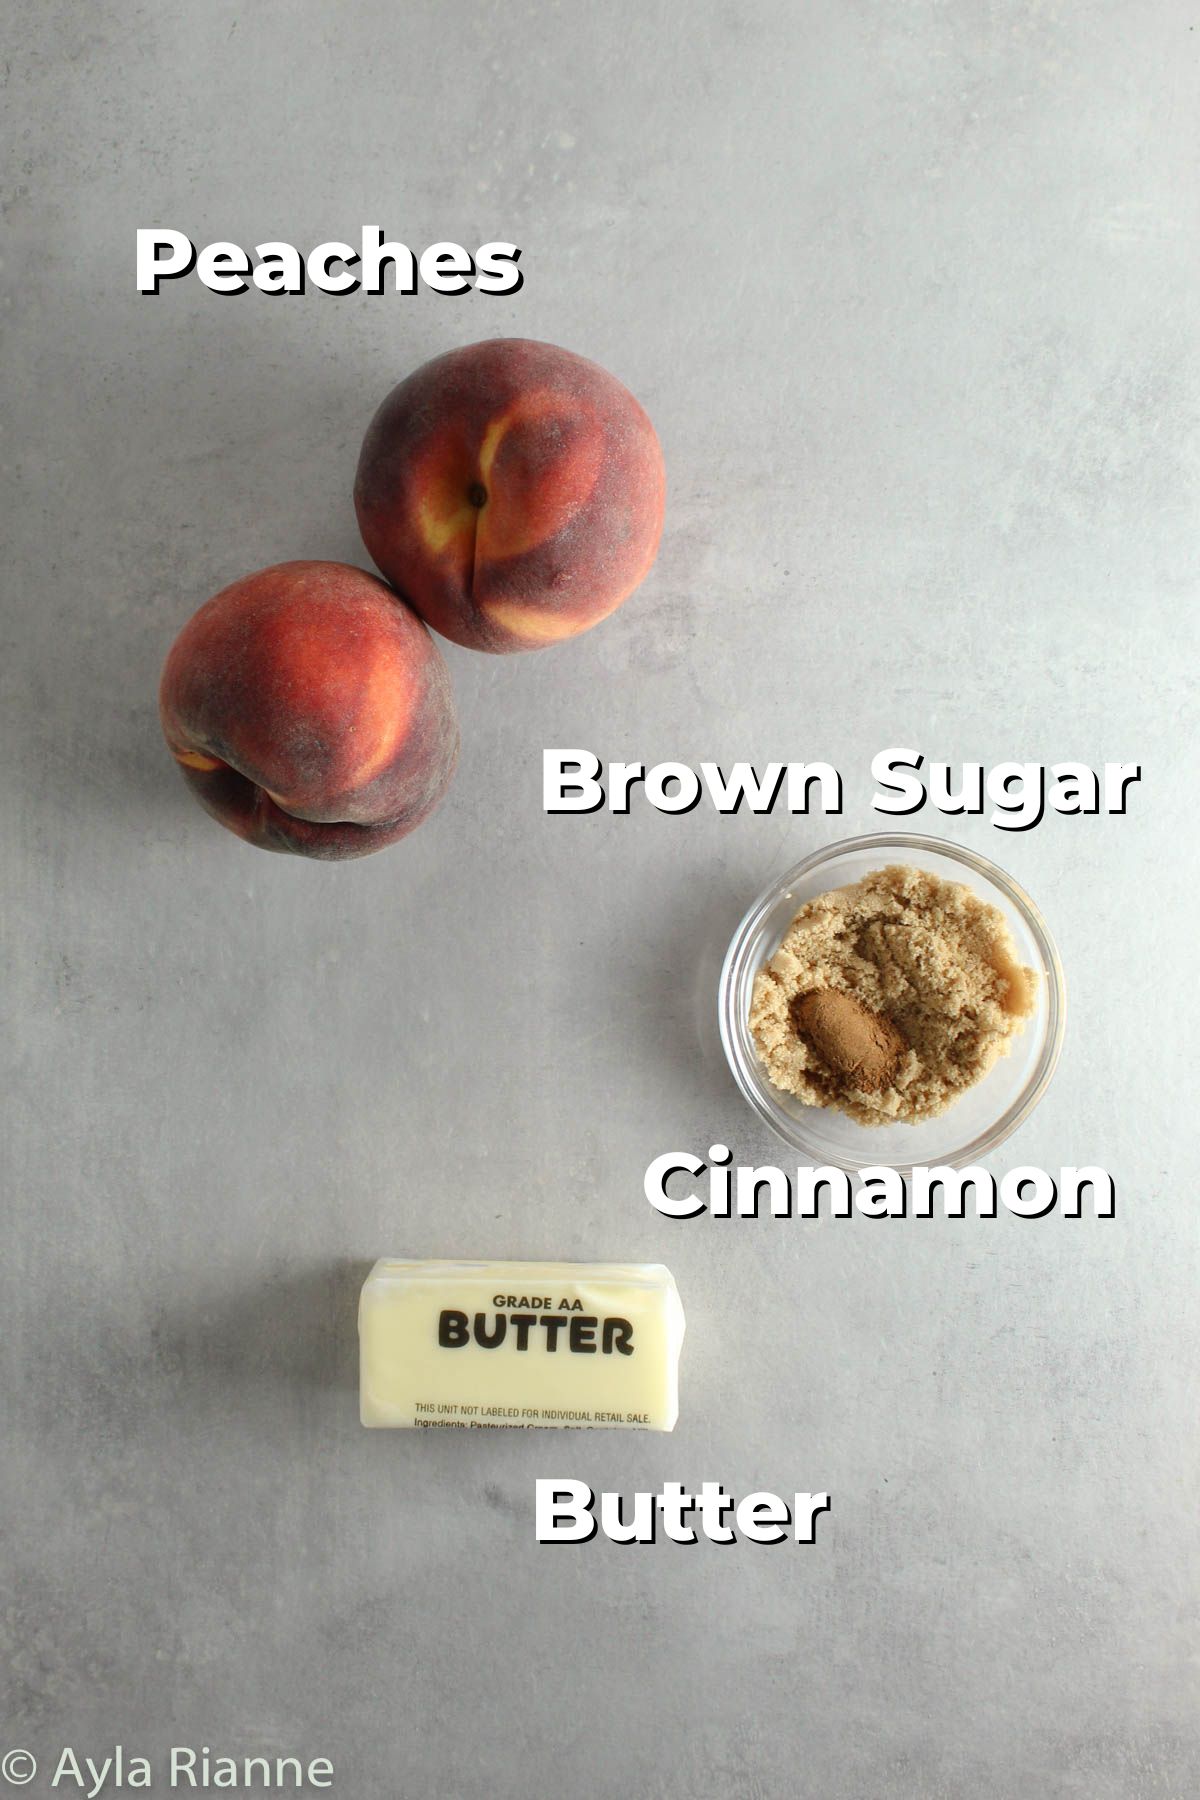 ingredients for baked peaches including peaches, brown sugar, cinnamon, and butter